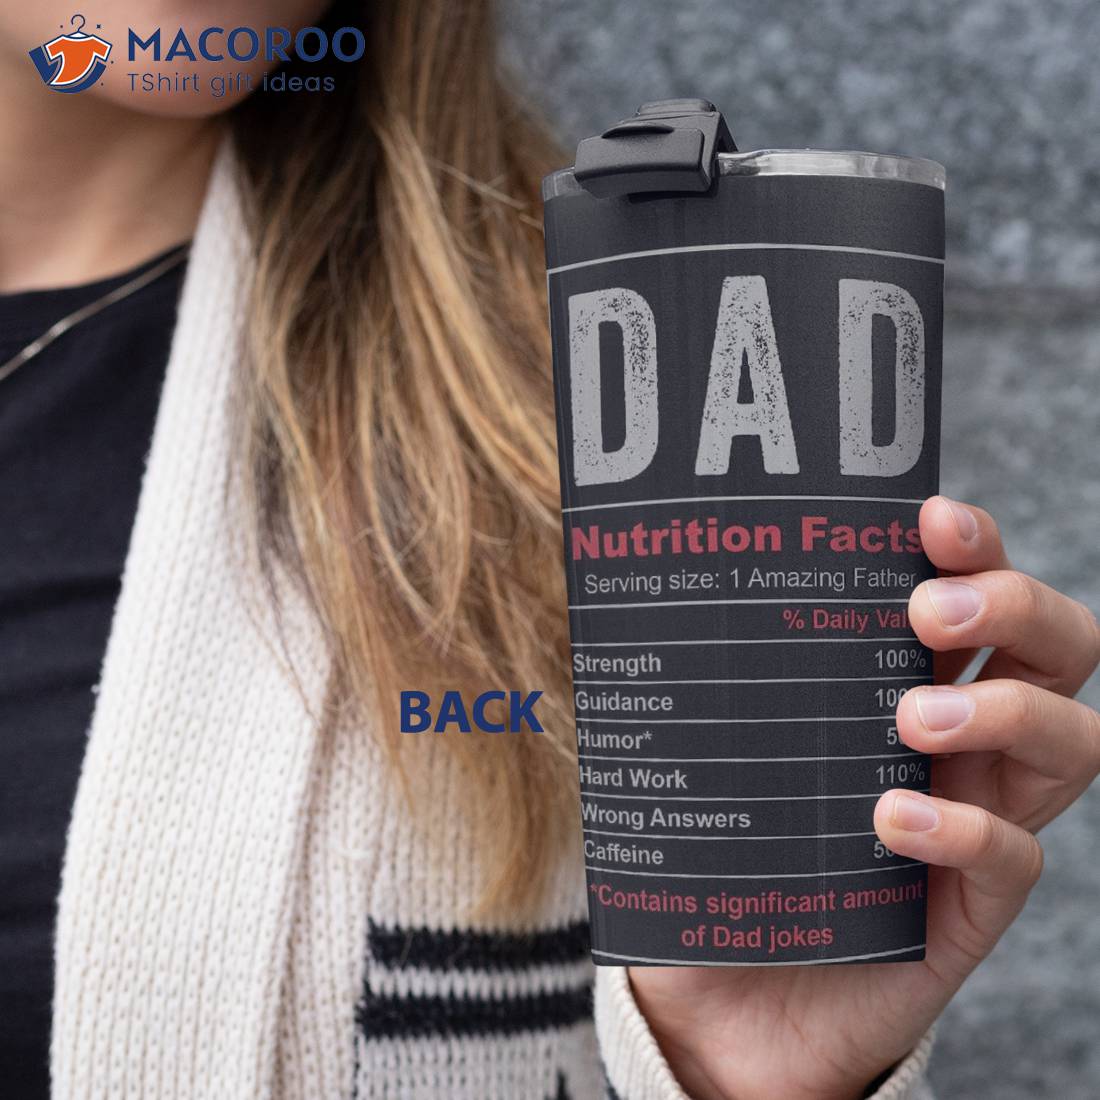 https://images.macoroo.com/wp-content/uploads/2023/03/best-dad-ever-gifts-american-flag-stainless-steel-tumbler-back-01.jpg